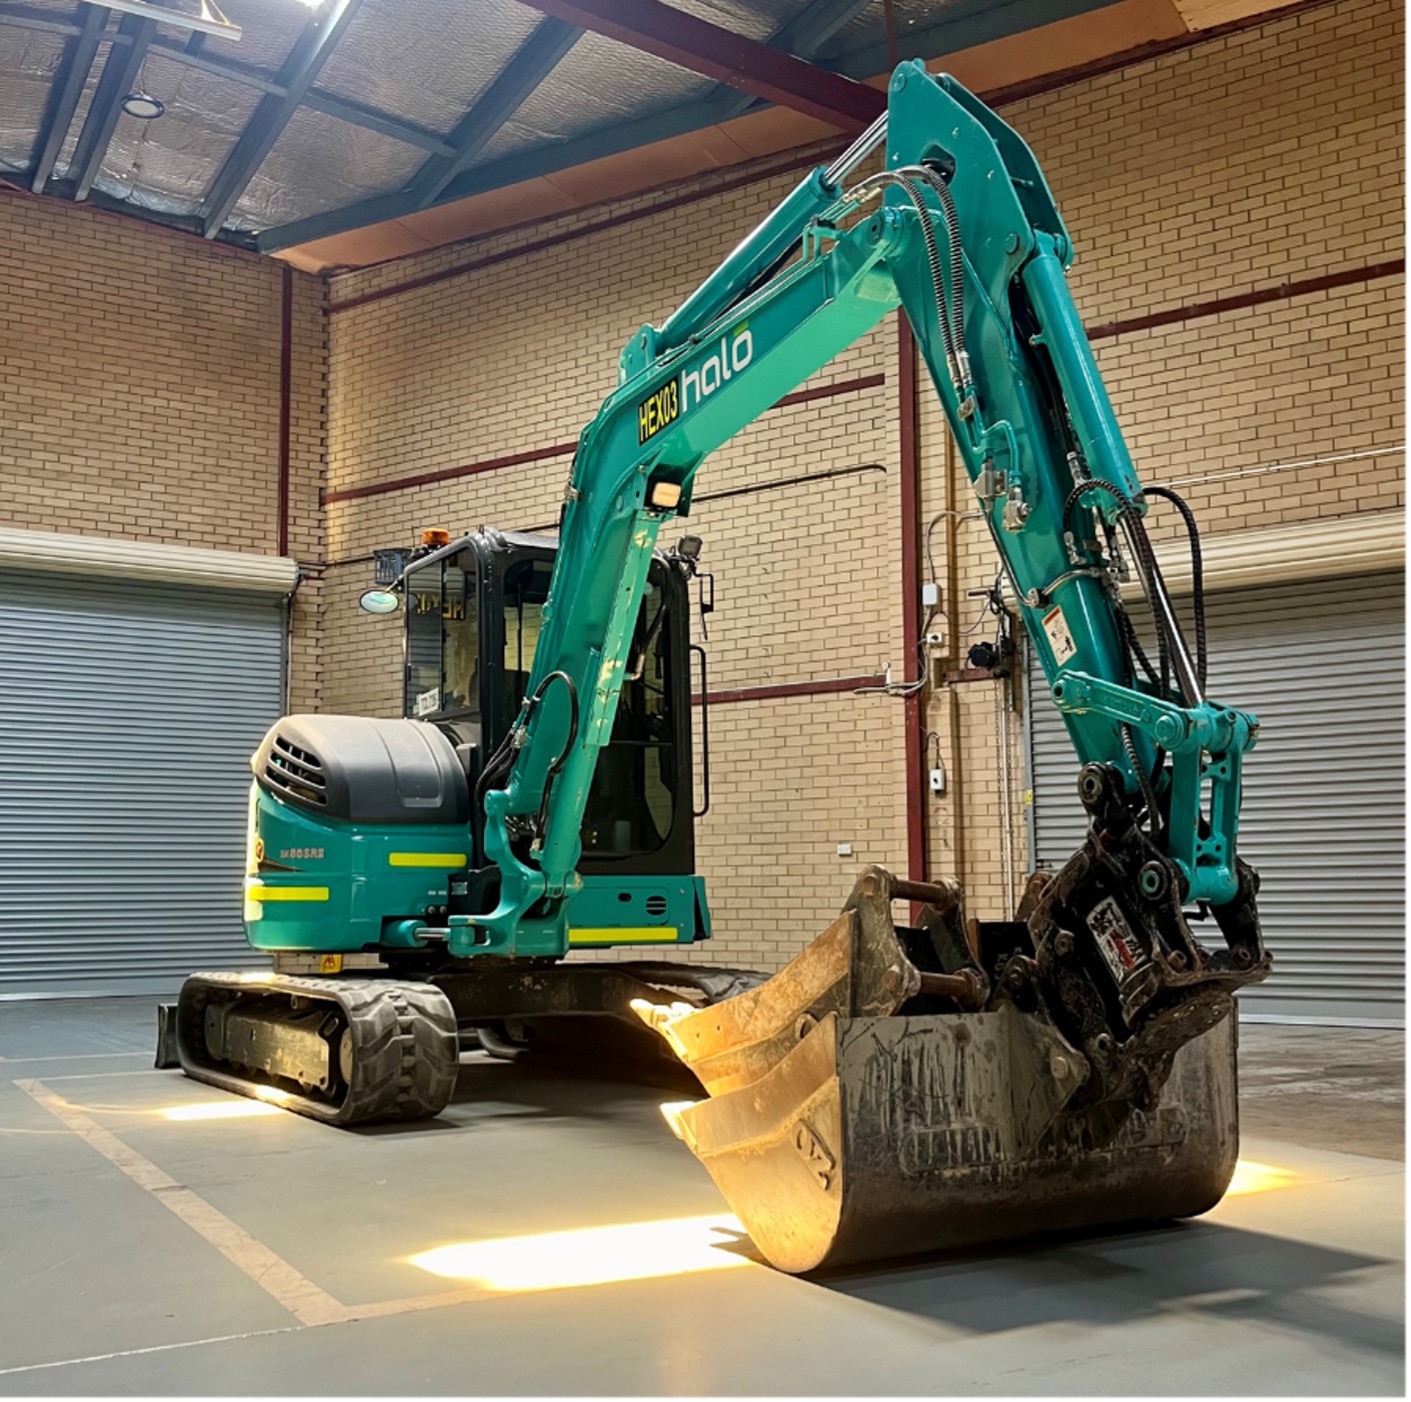 Halo Civil Innovation Height and Slew Kobelco SK55SR 5t excavator